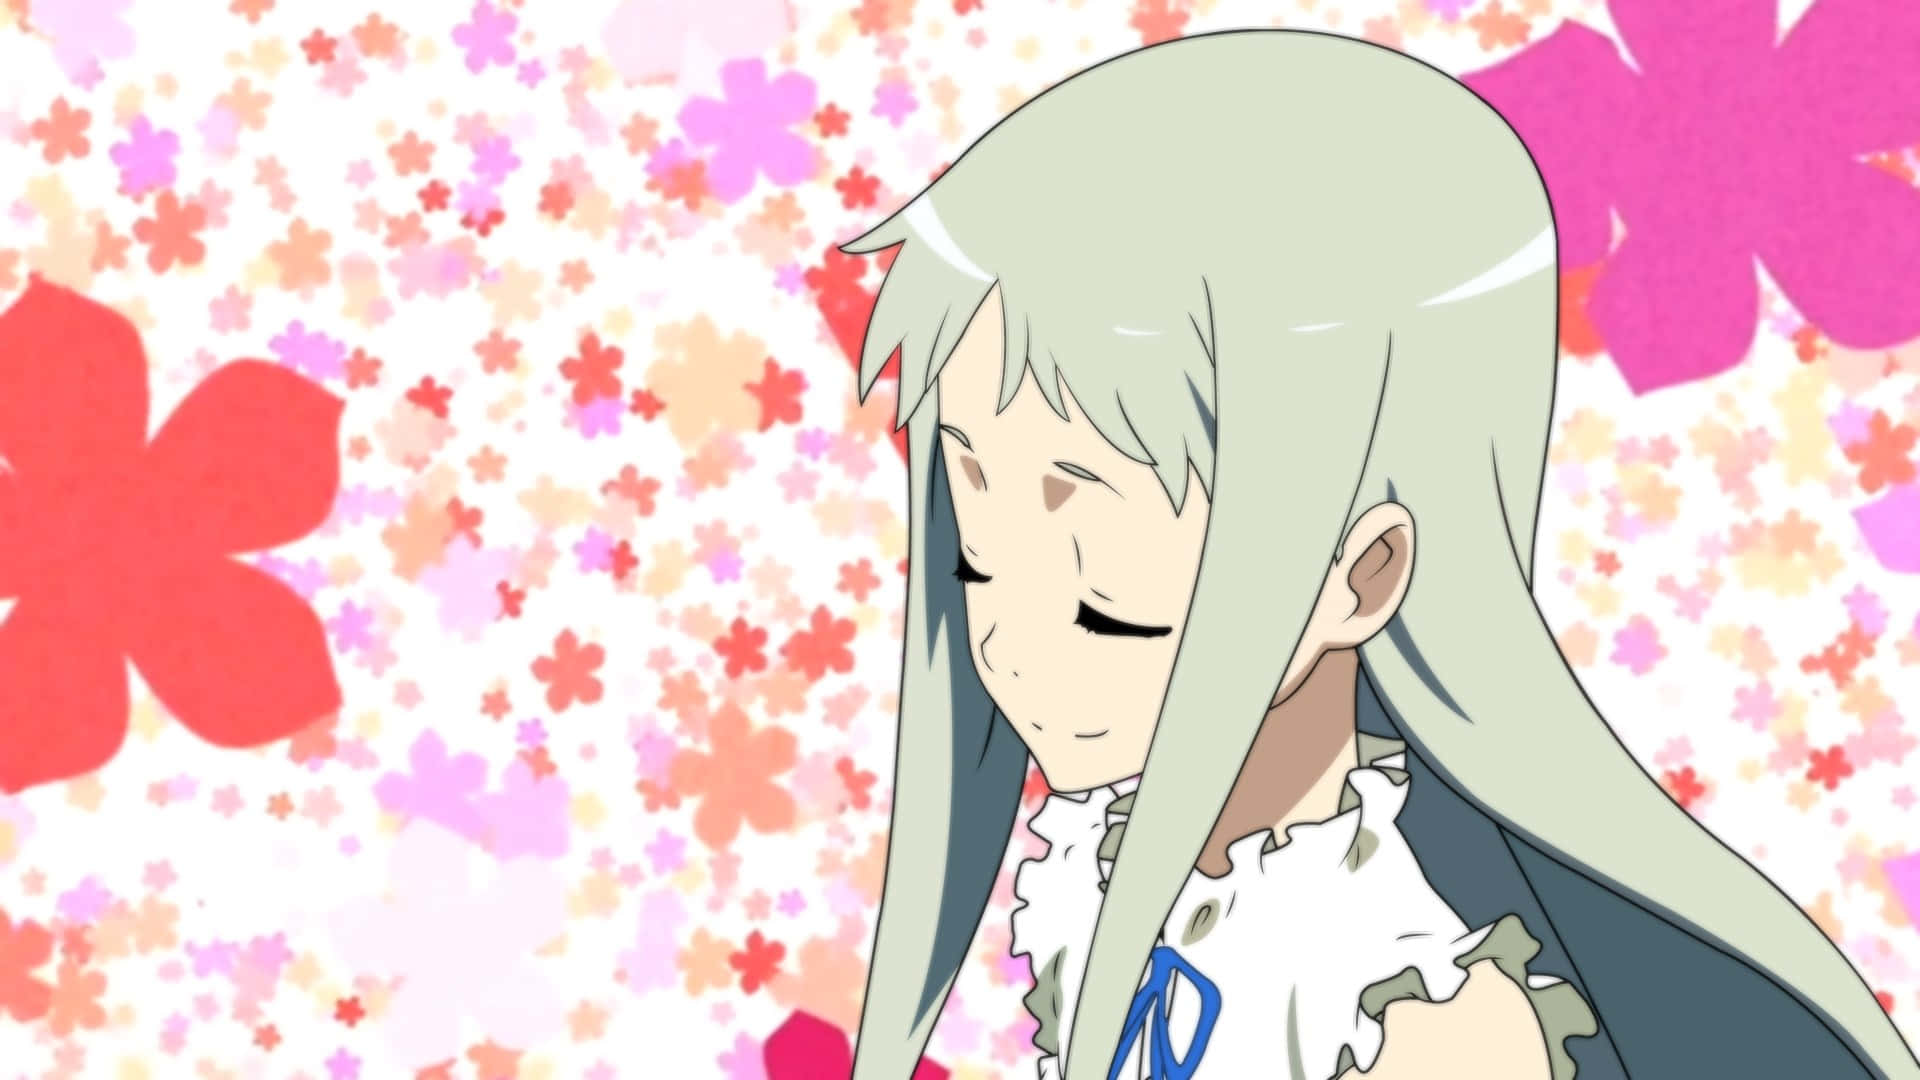 Renew your hope with Anohana!